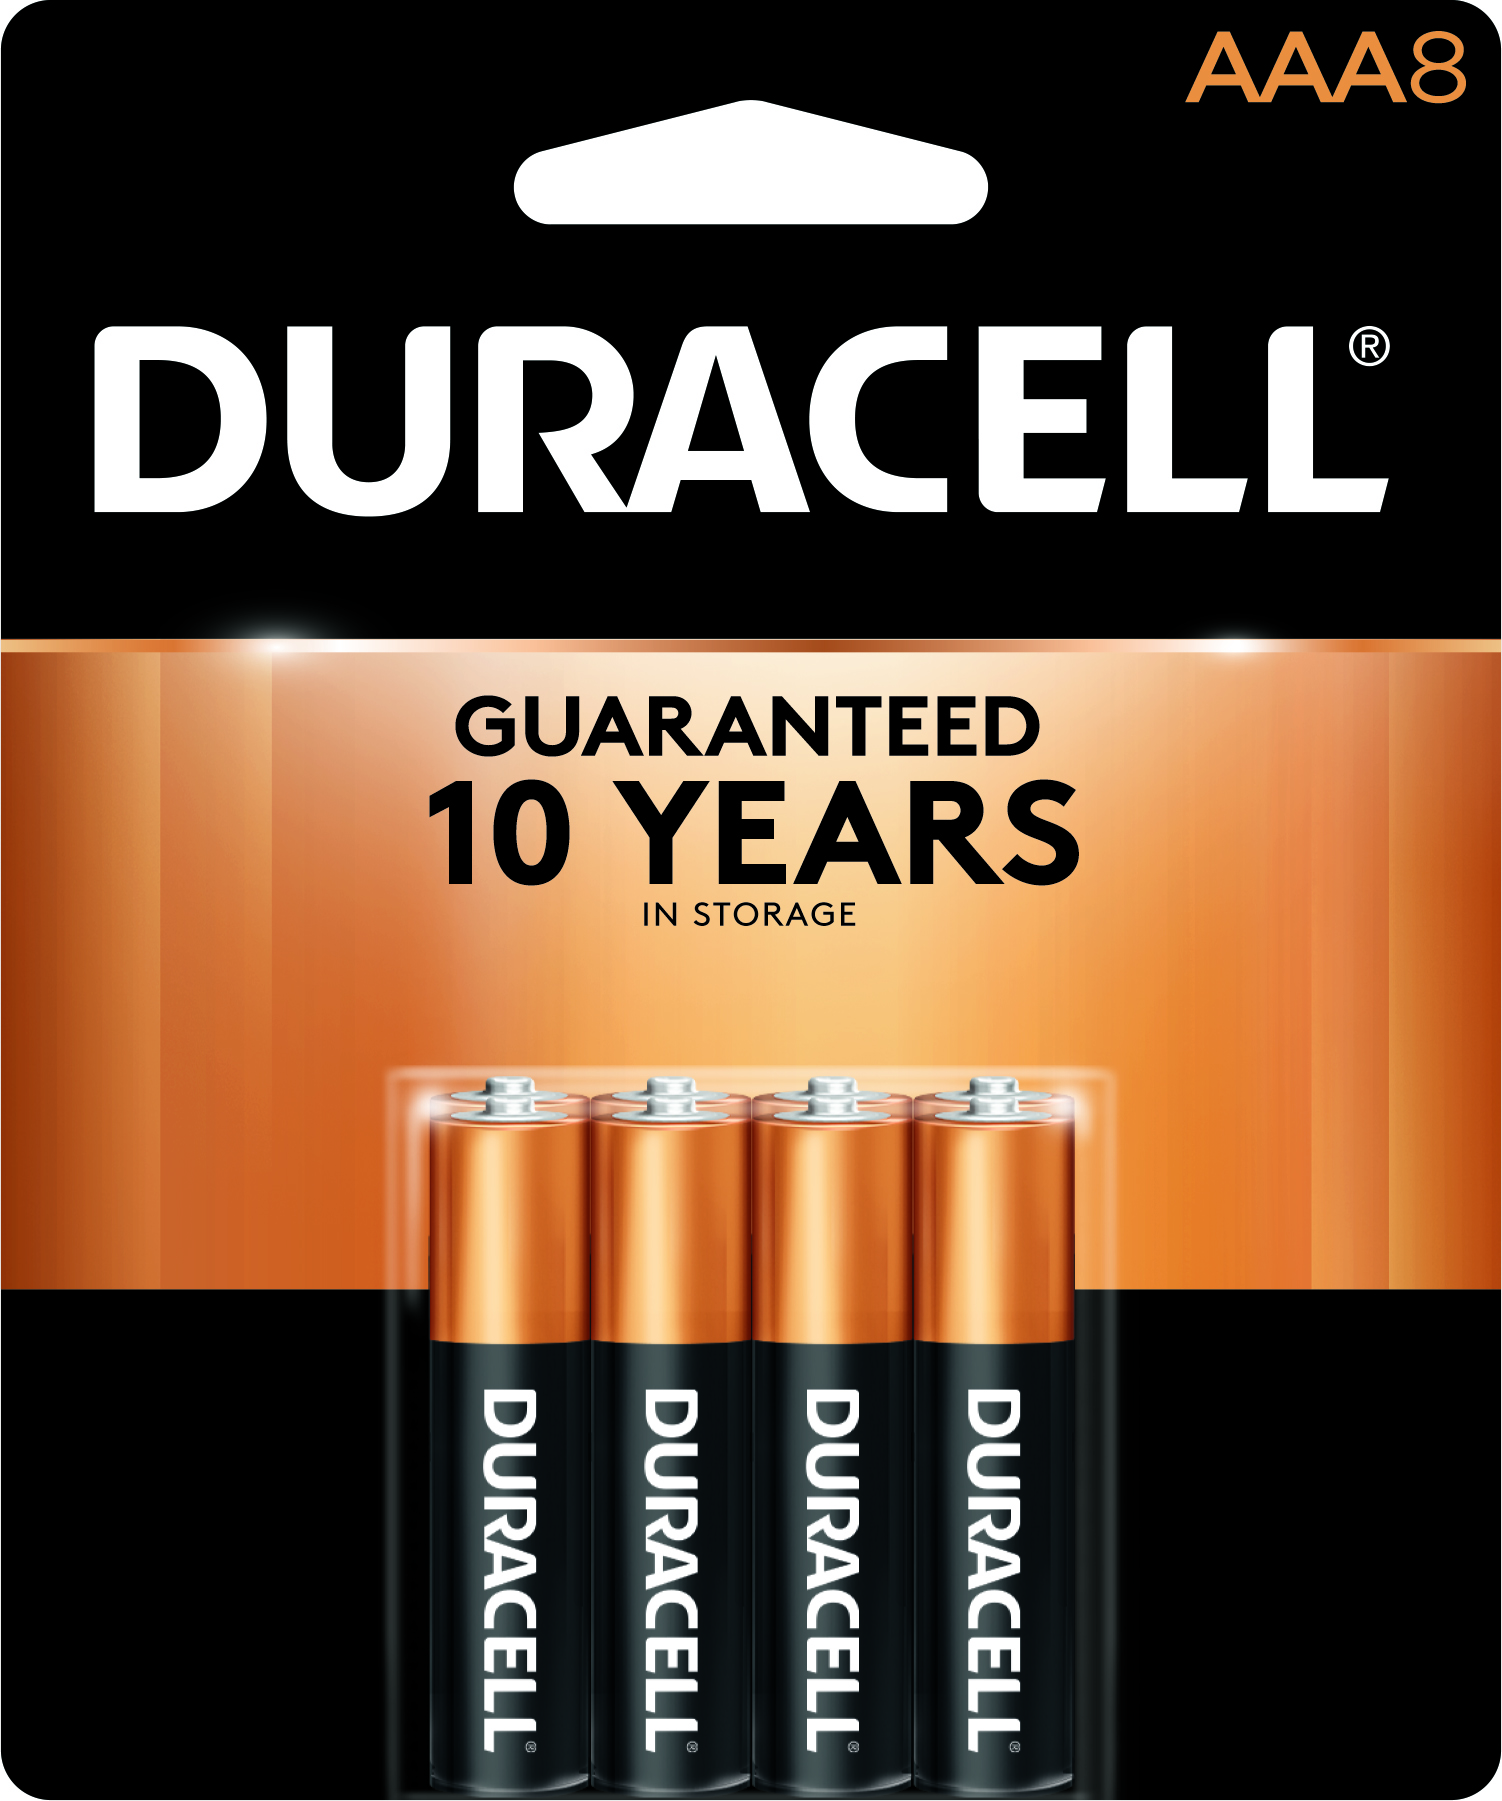 Duracell AAA batteries - Rechargeable and traditional